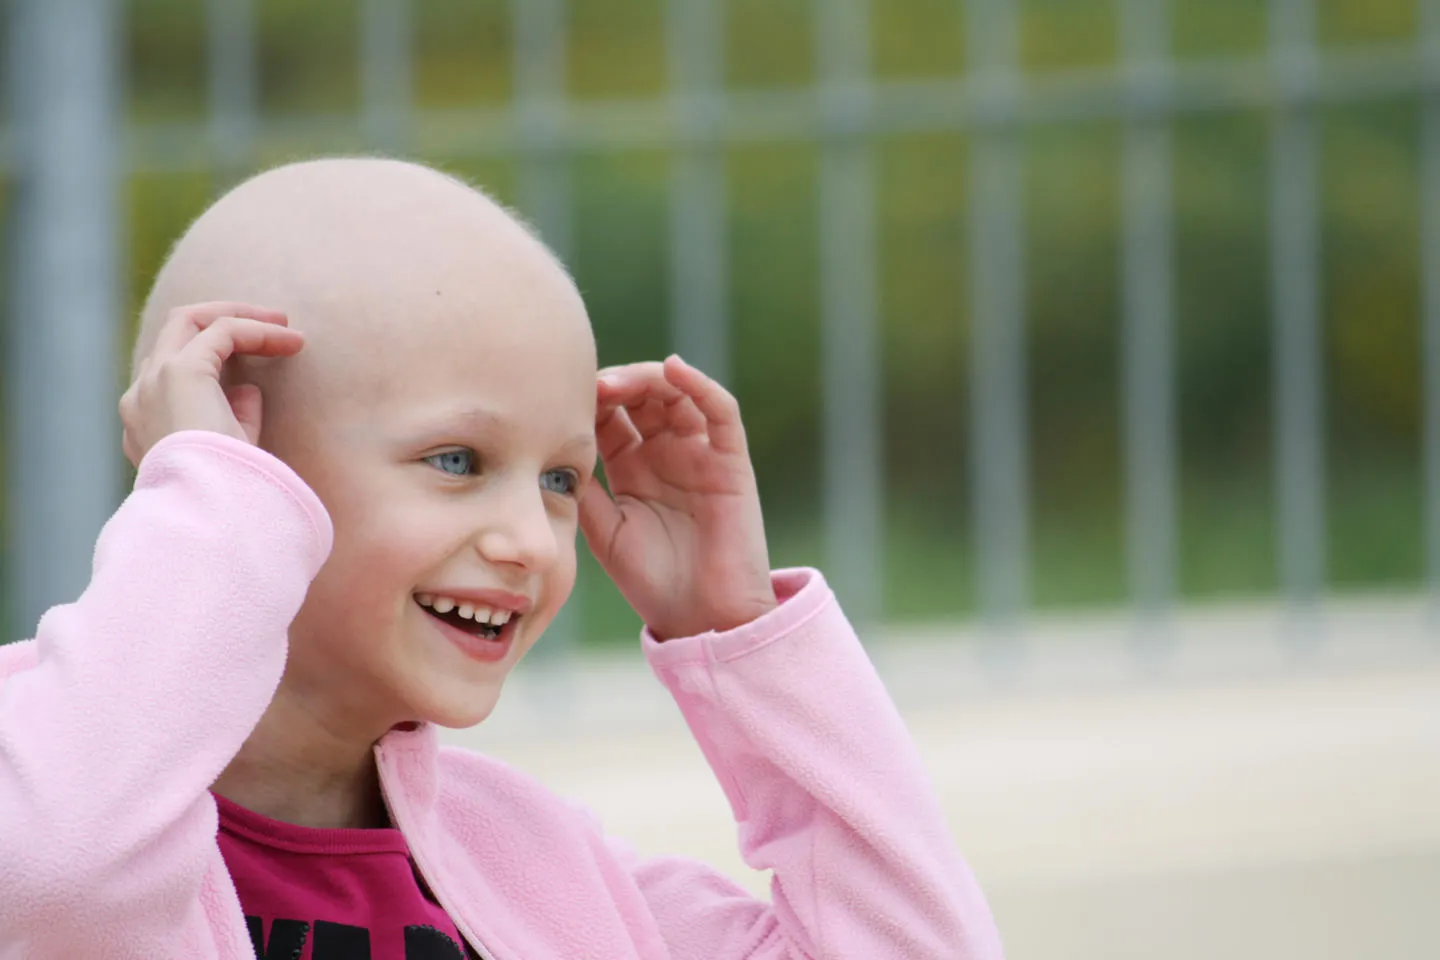 Child with cancer 